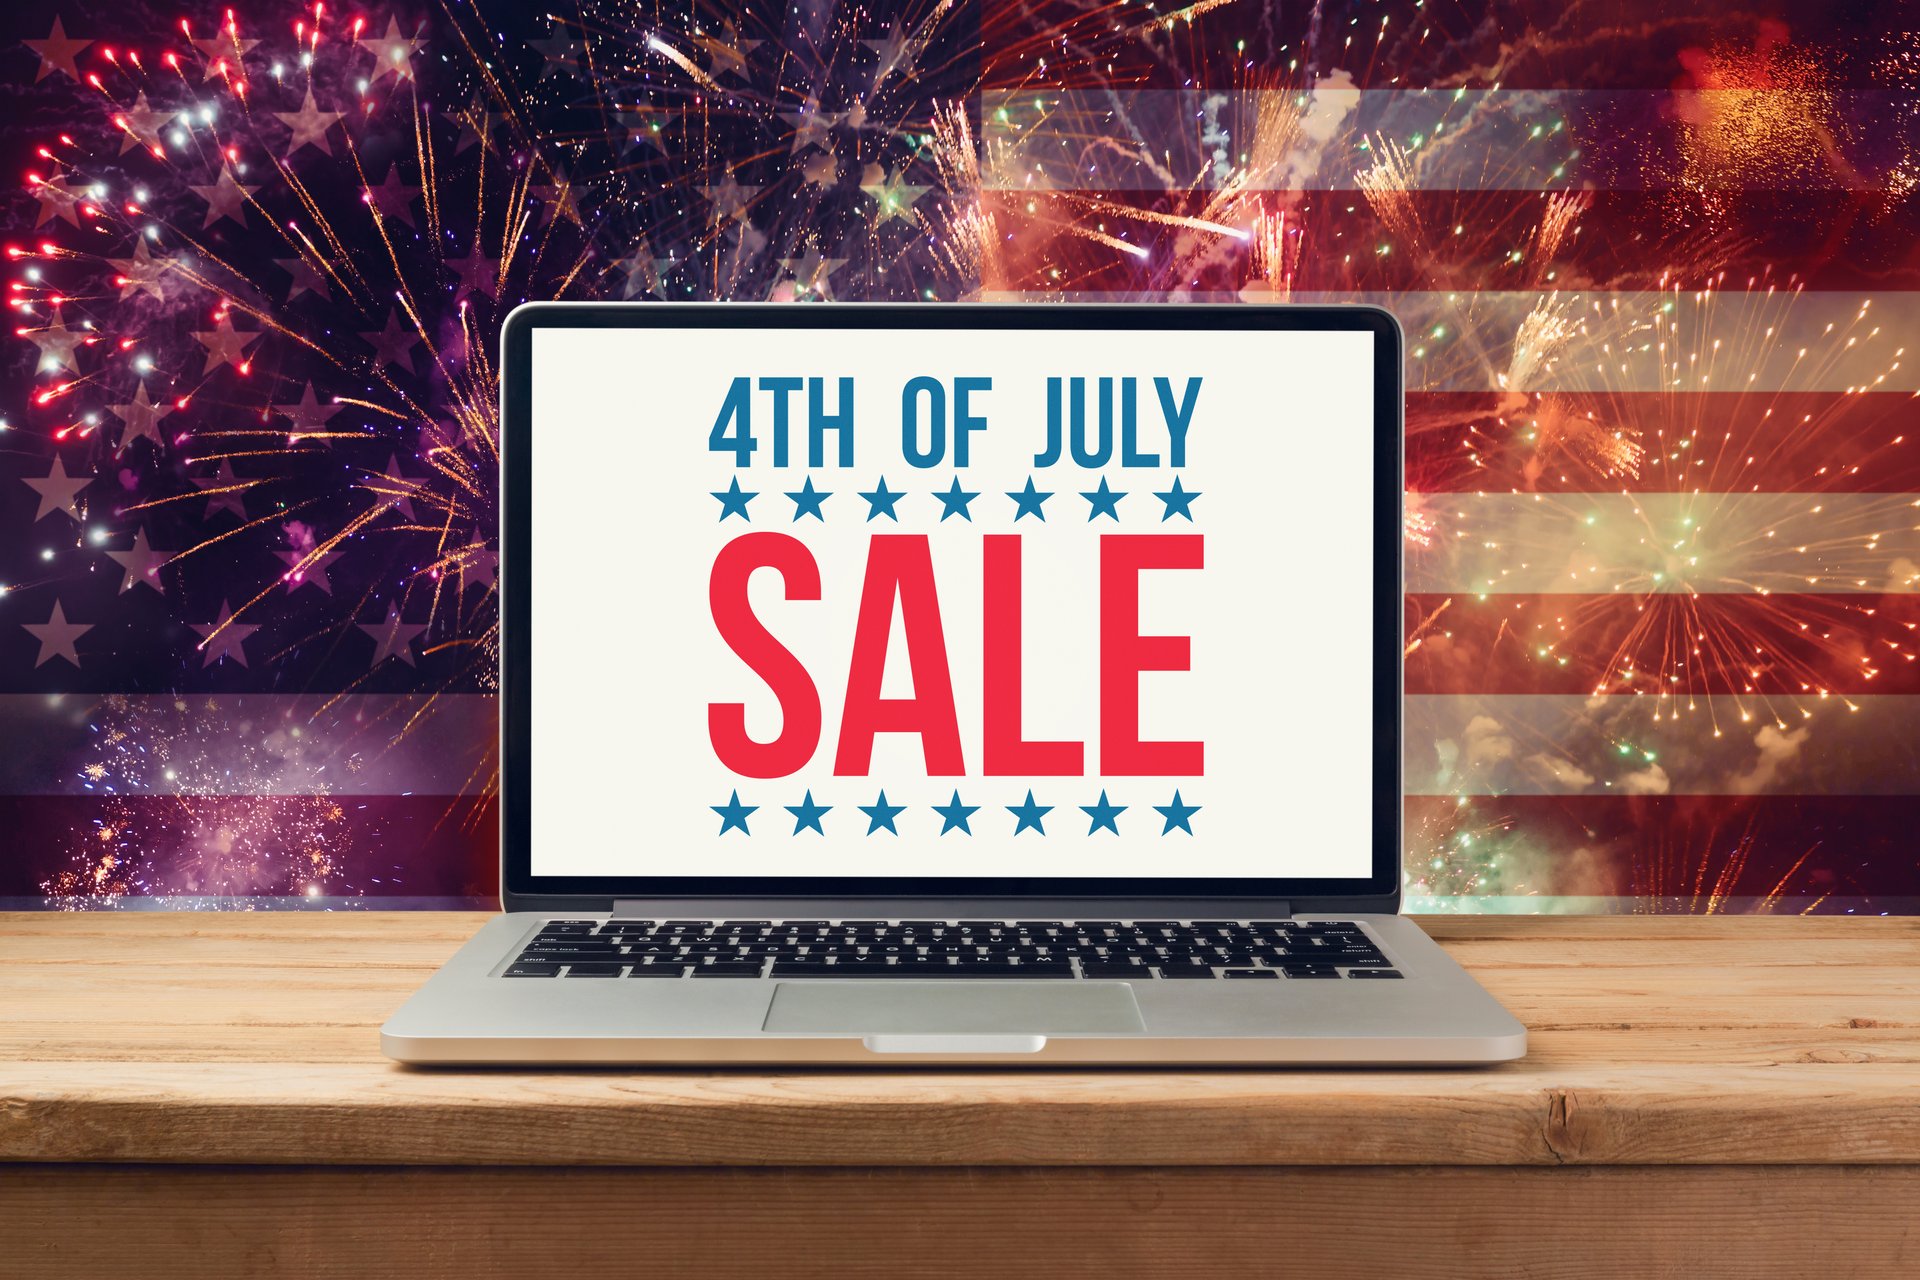 4th of July sale